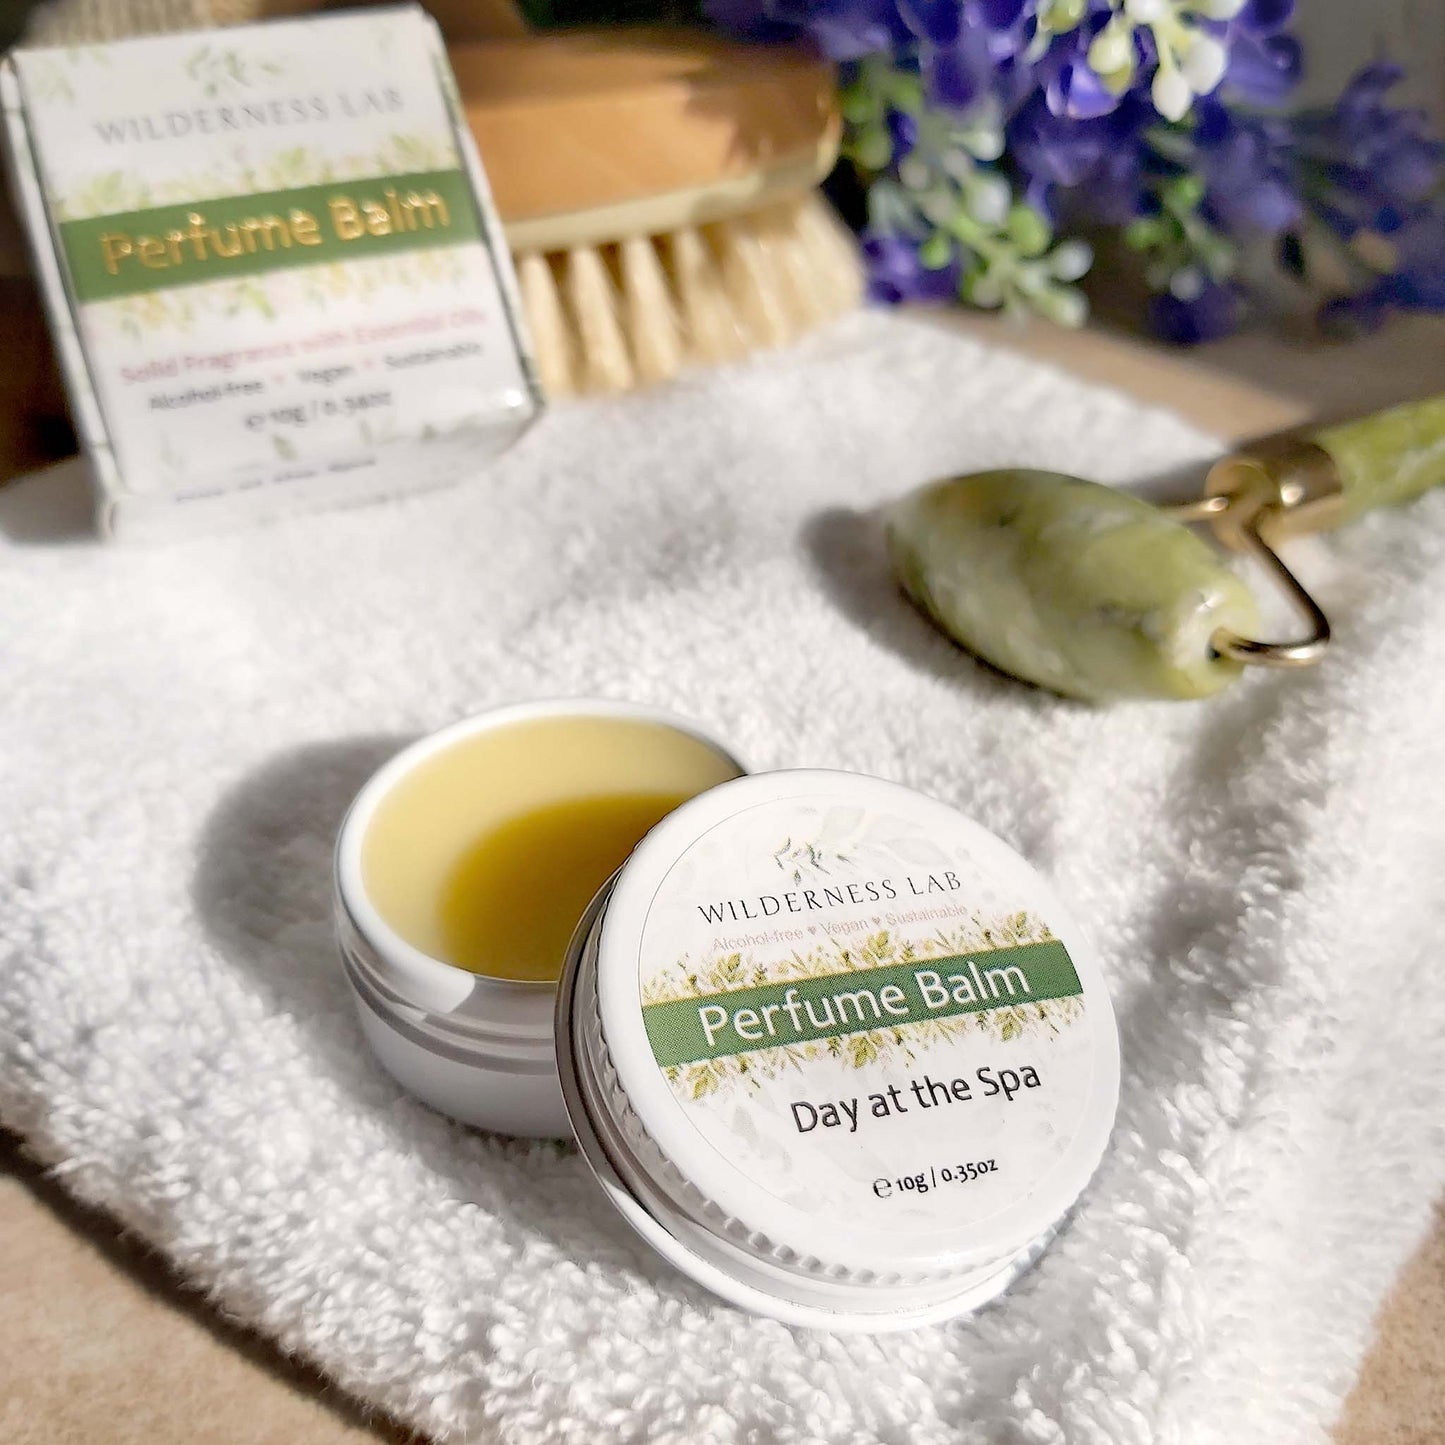 Day at the Spa Solid Perfume - natural vegan perfume balm with essential oils